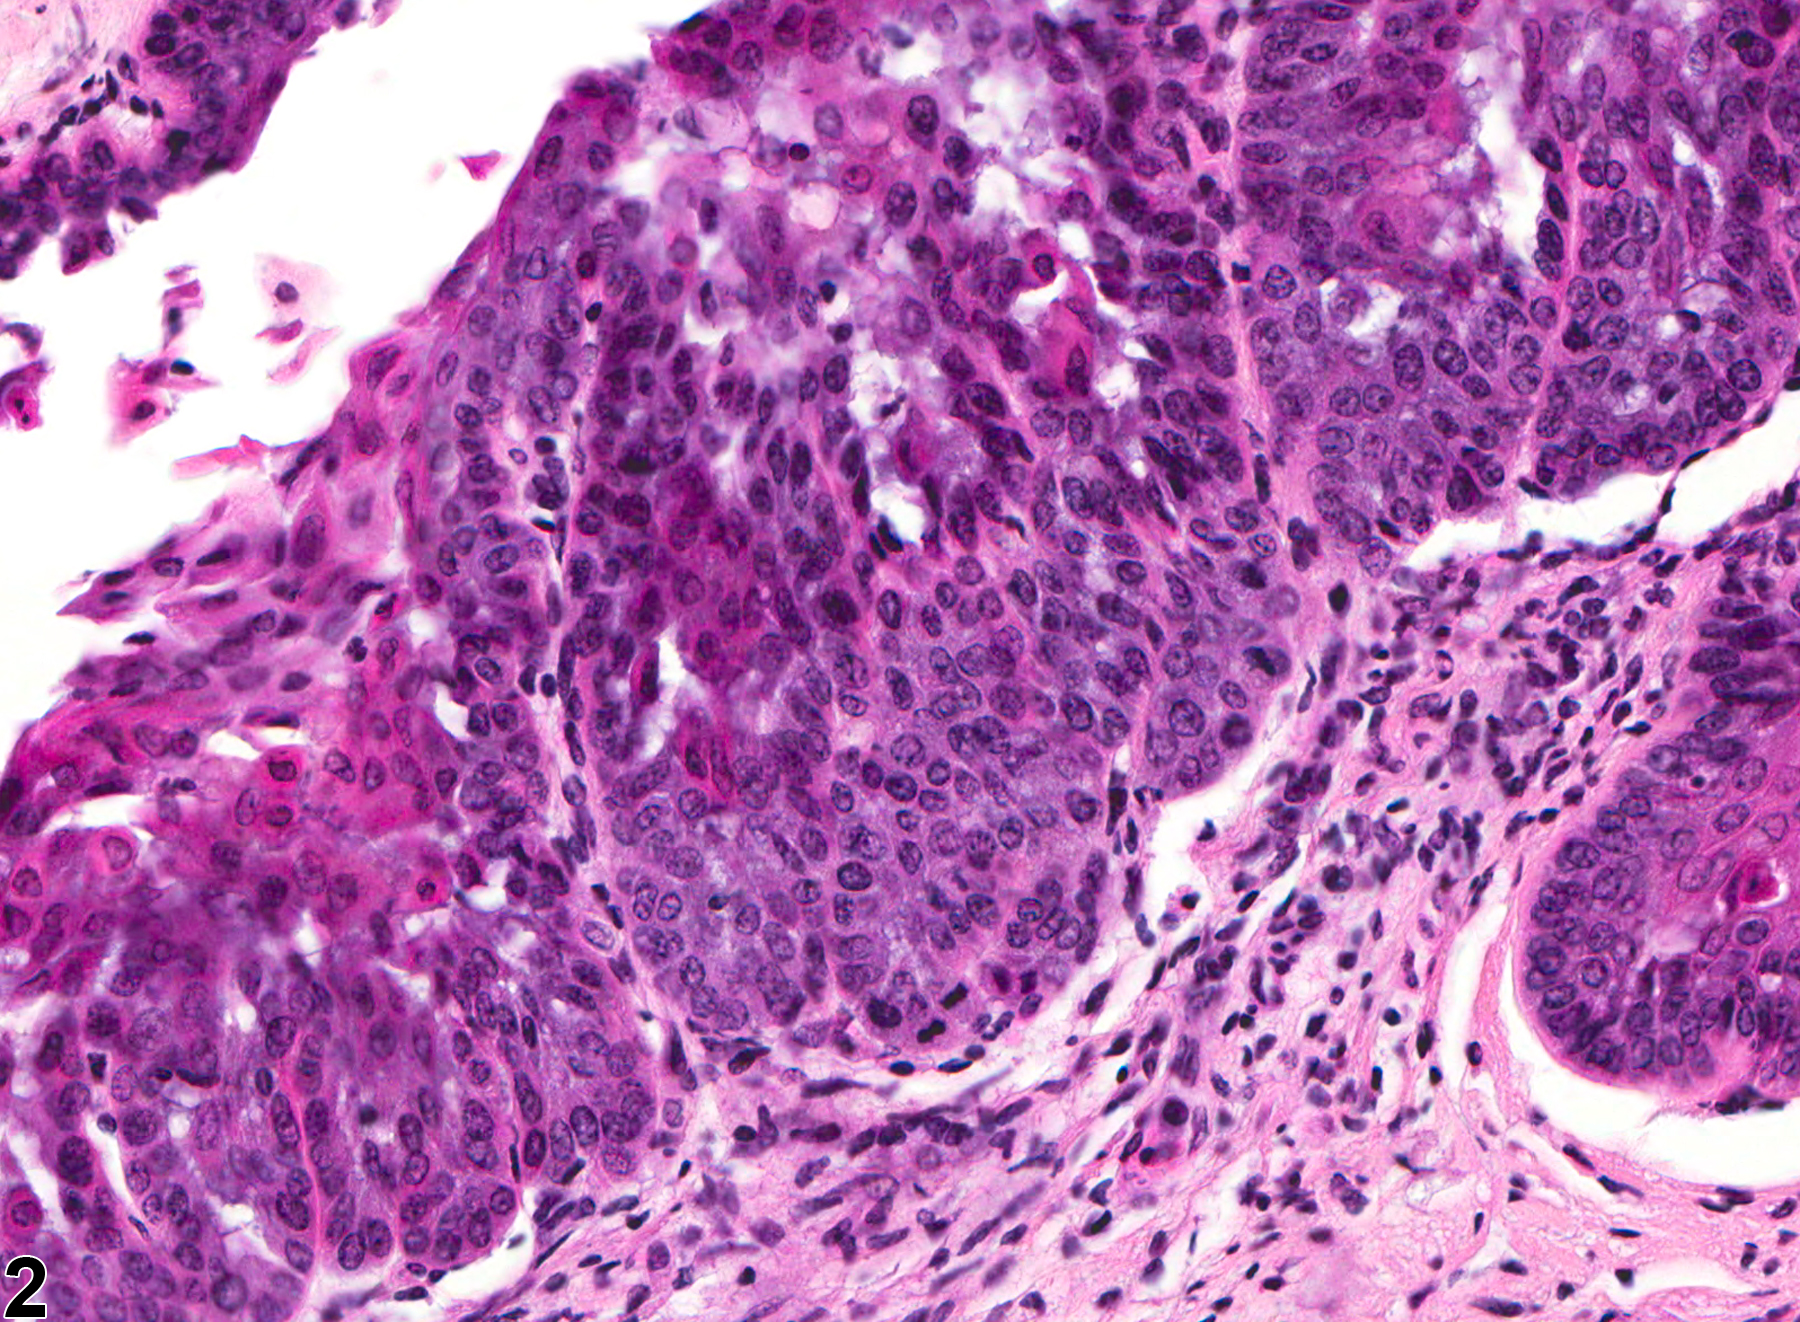 Image of hyperplasia in the vagina from a female B6C3F1 mouse in a chronic study